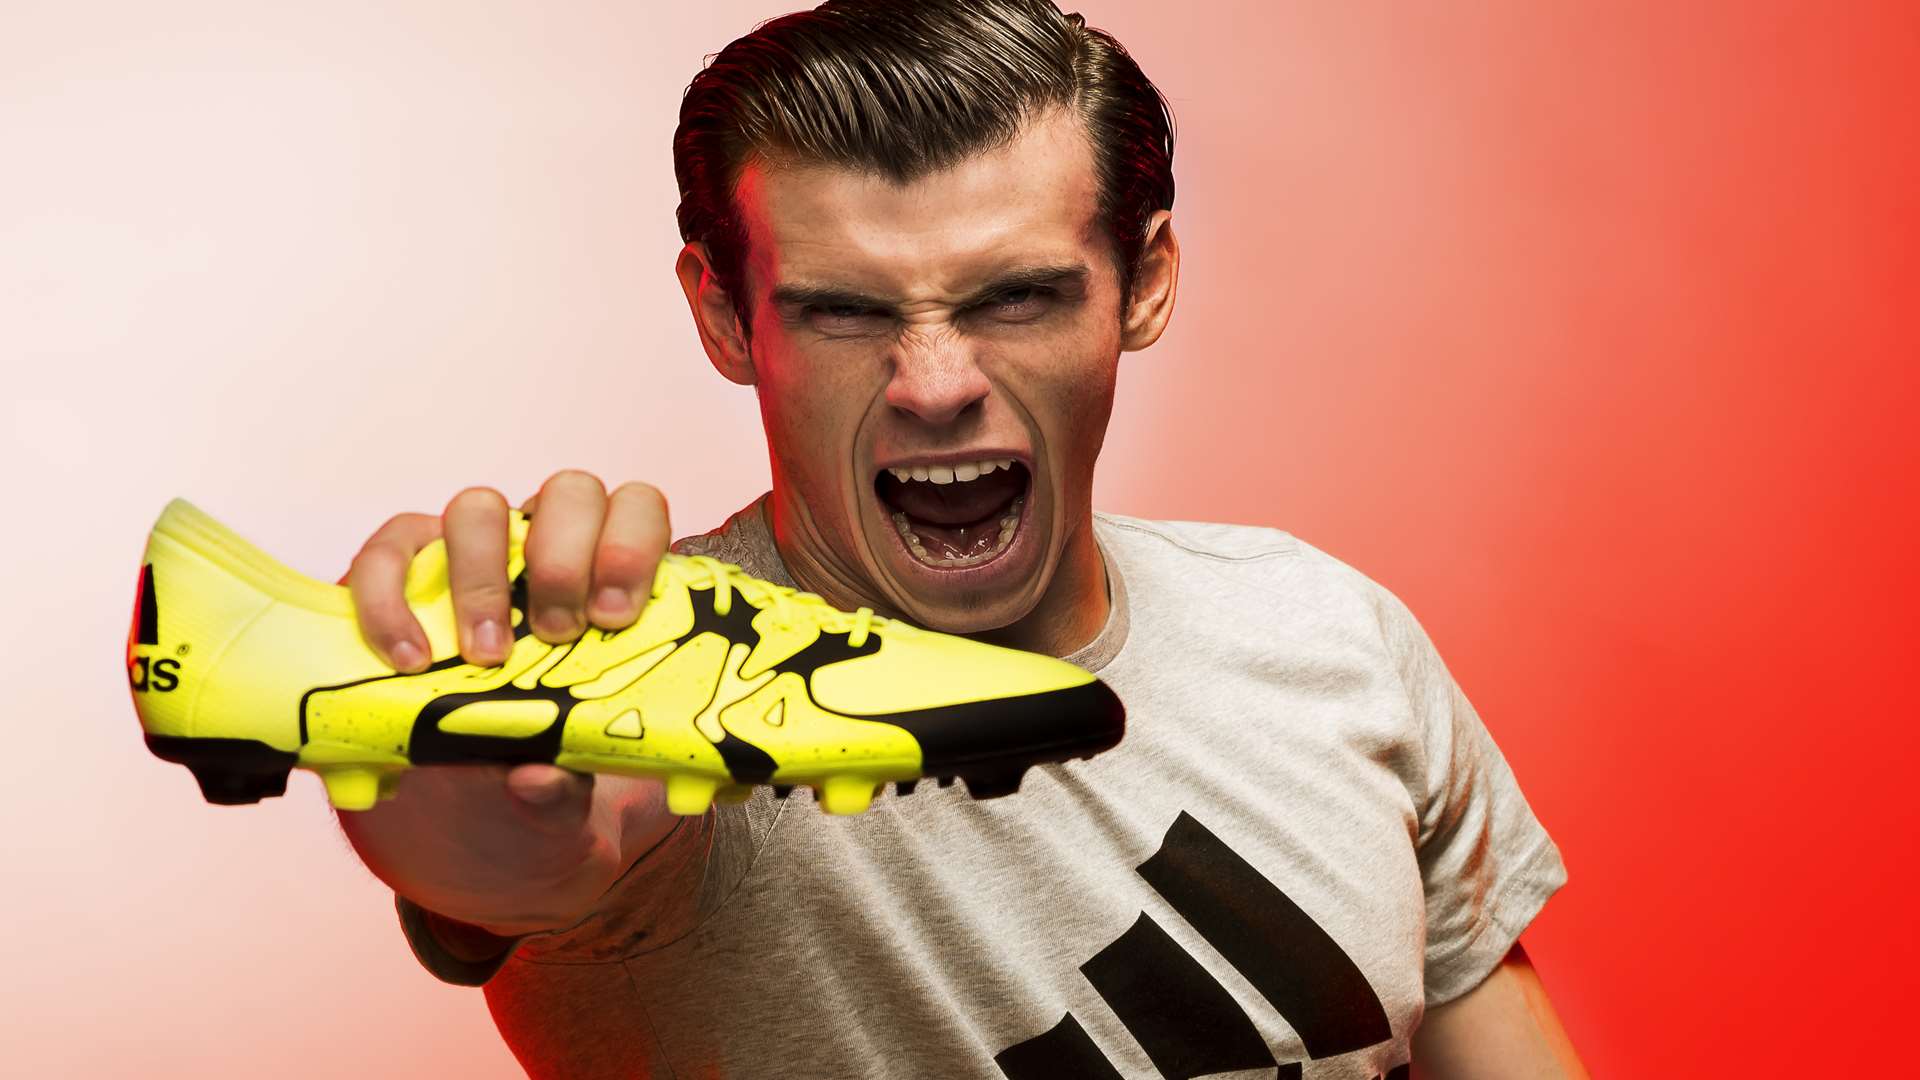 FOR HIM: If the man in your life lives and breathes football, splash out on these top of the range boots - Adidas x15 - as worn by Real Madrid’s Gareth Bale. From £100 at Adidas